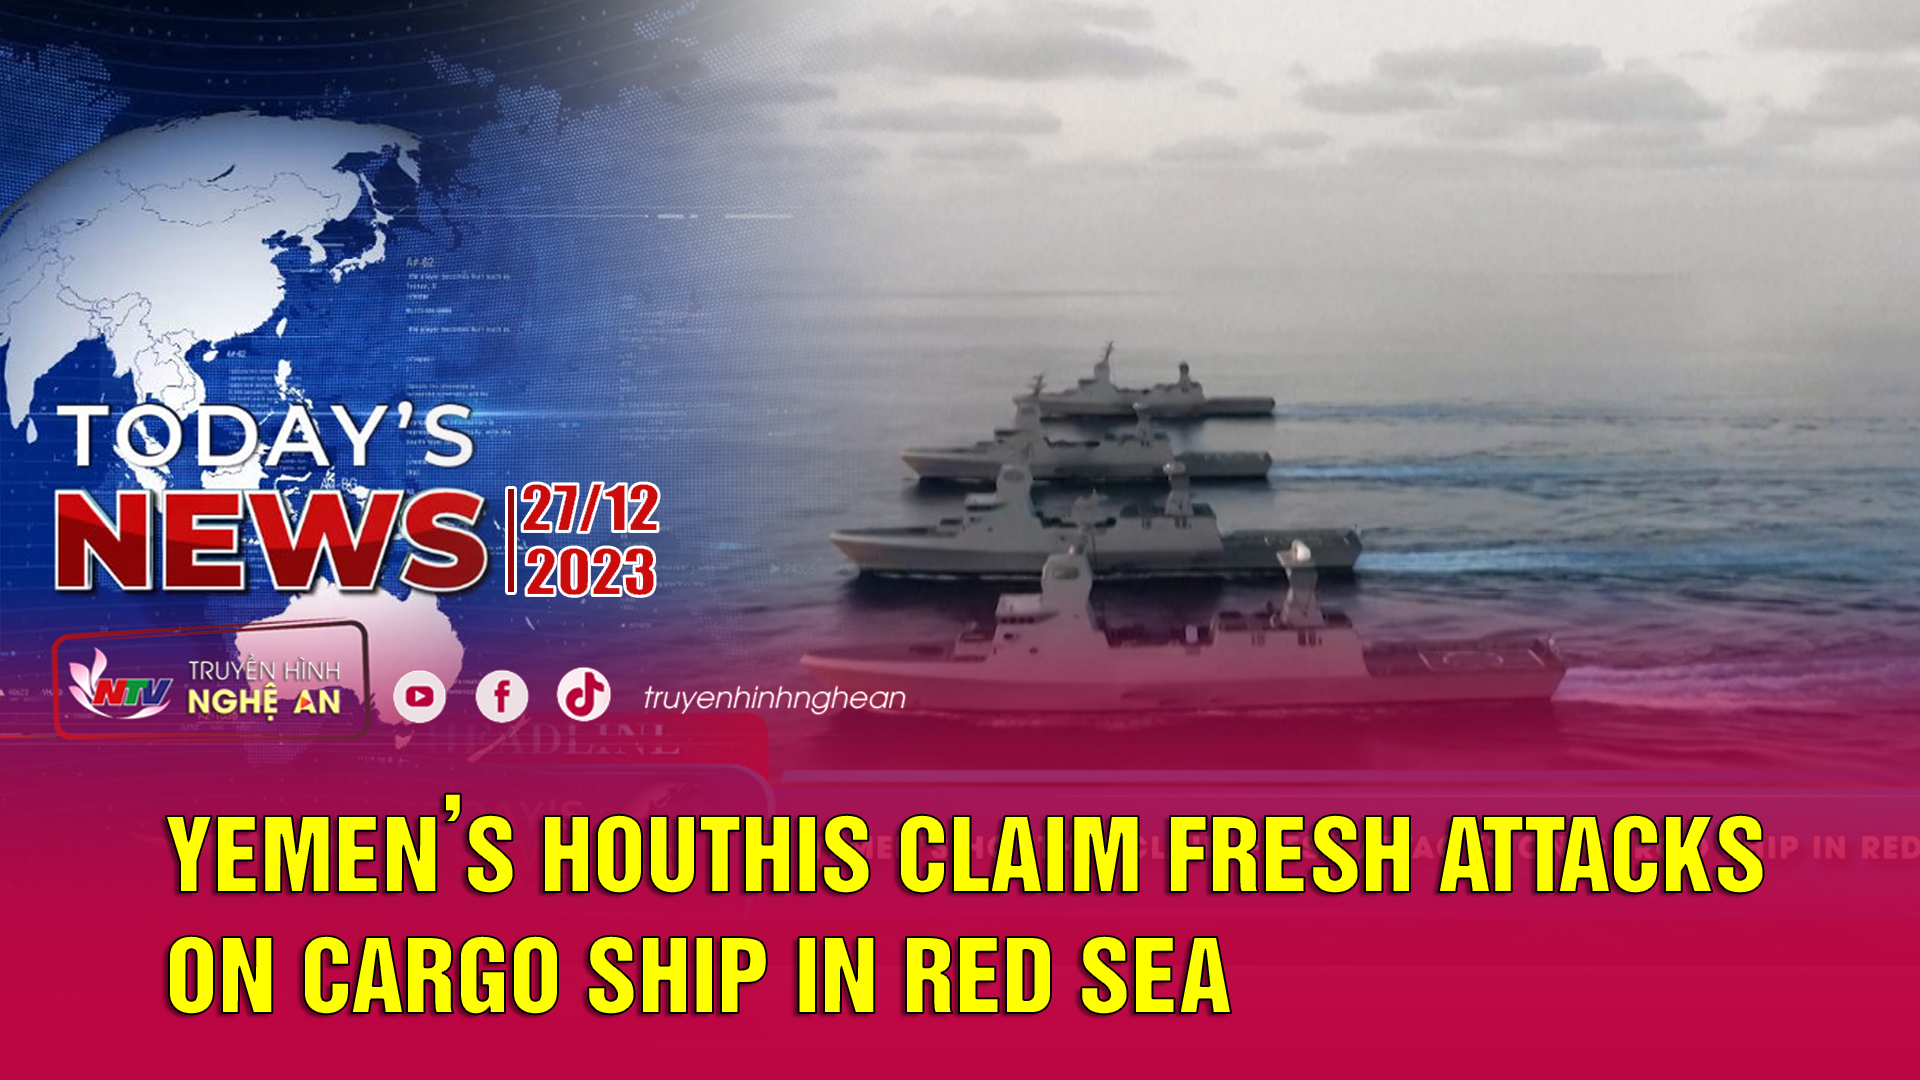 Today's News - 27/12/2023:  Yemen’s Houthis claim fresh attacks on cargo ship in Red Sea